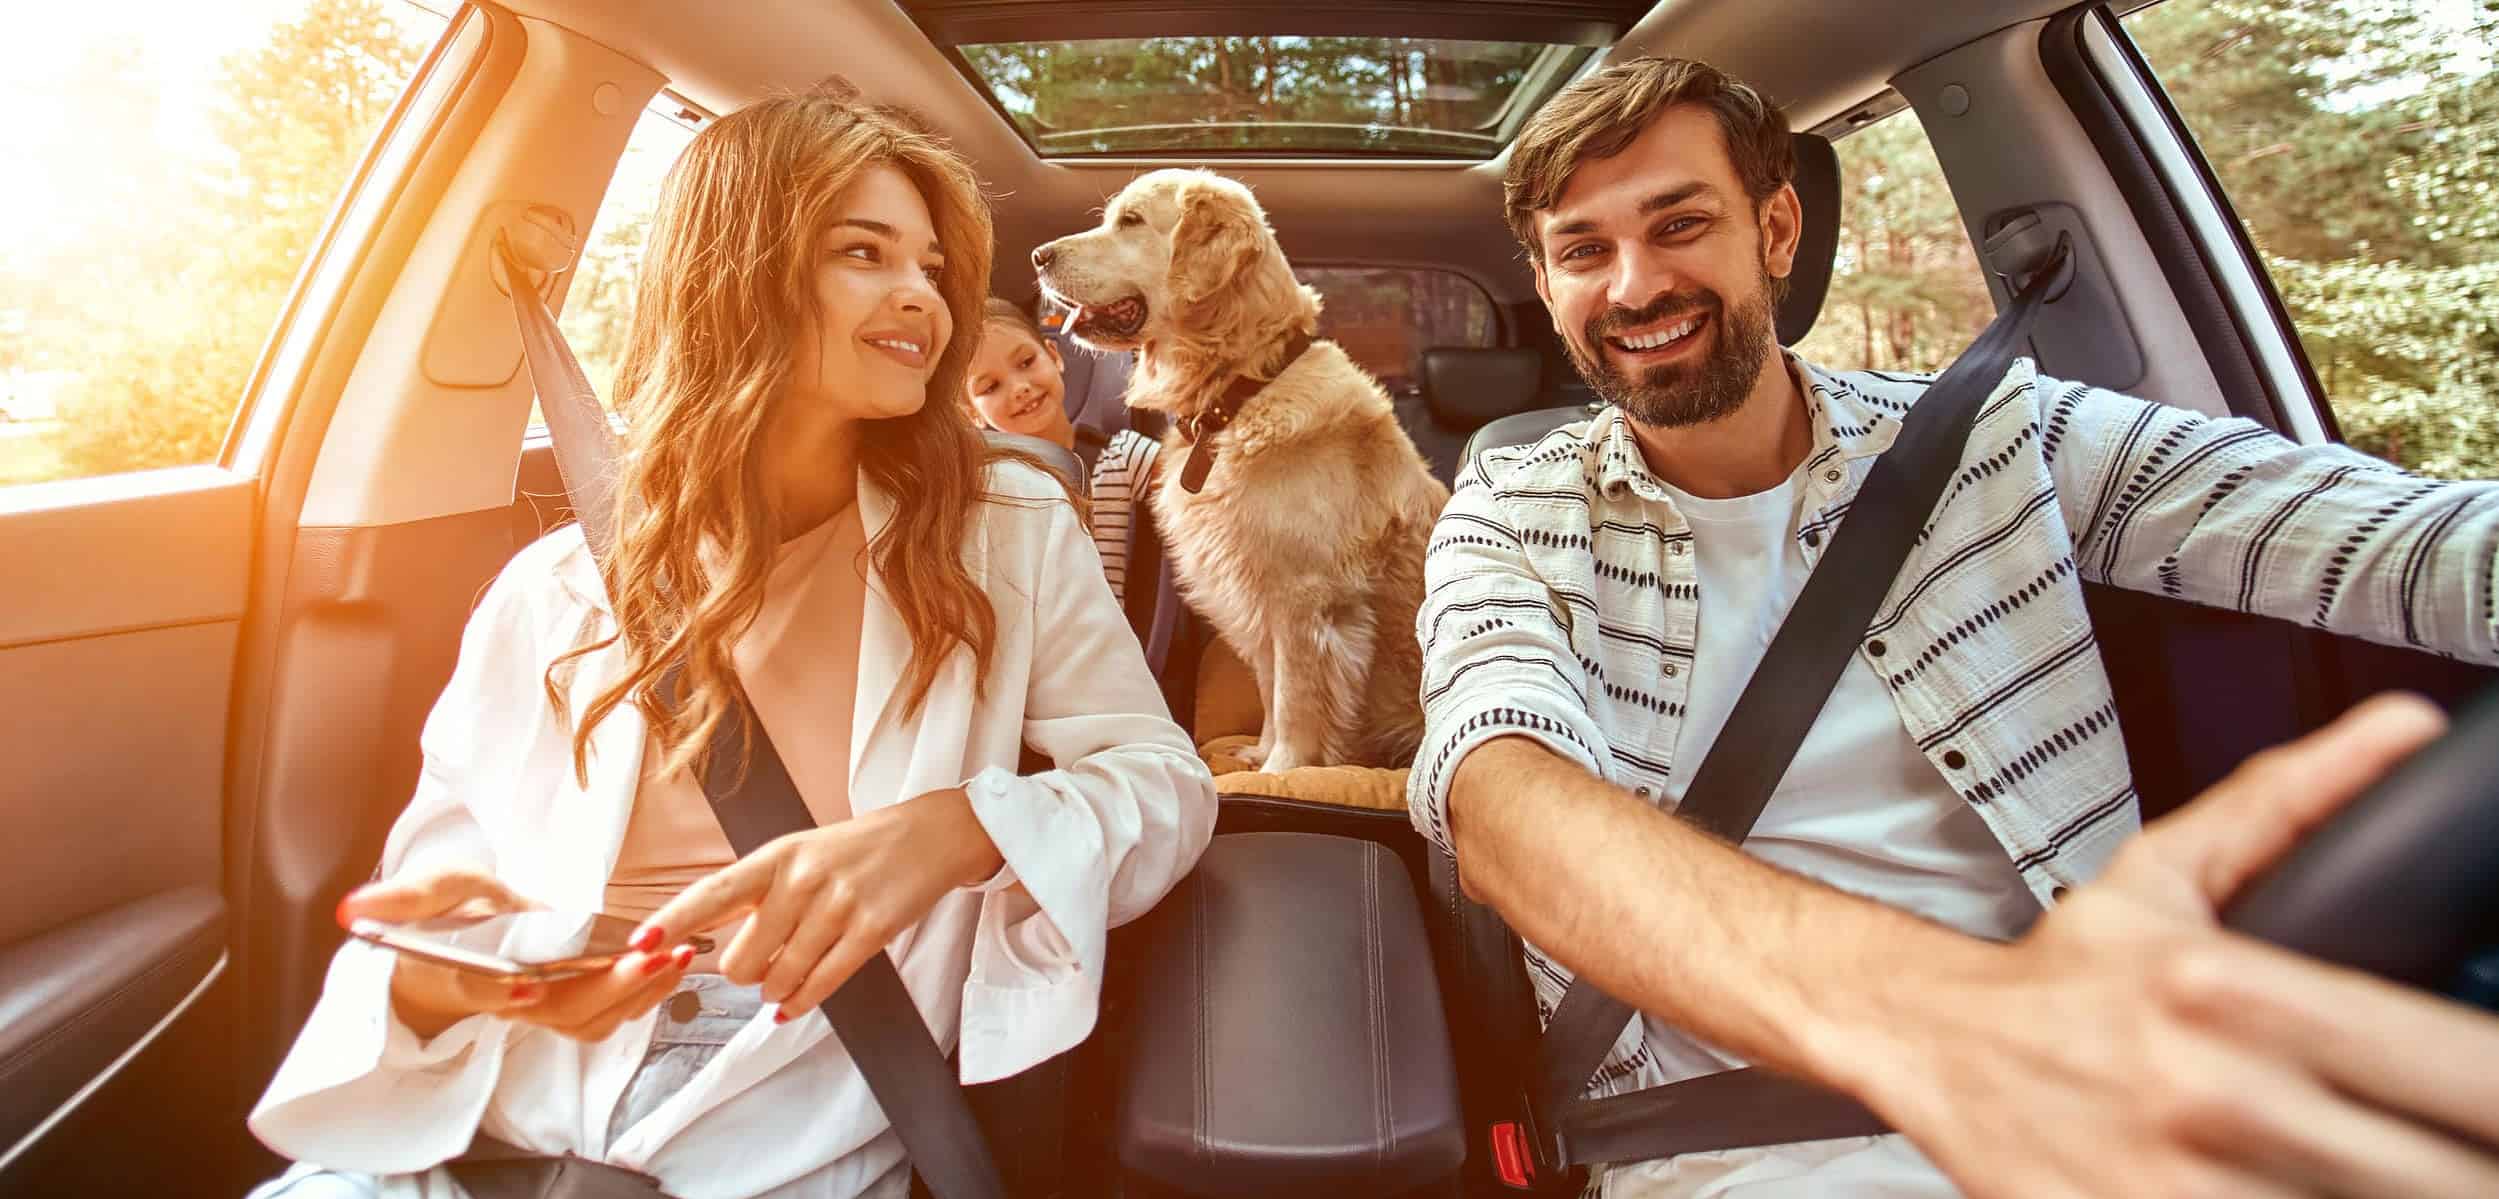 Mom,Dad,daughter-traveling-with-ipad-in-car-with-dog